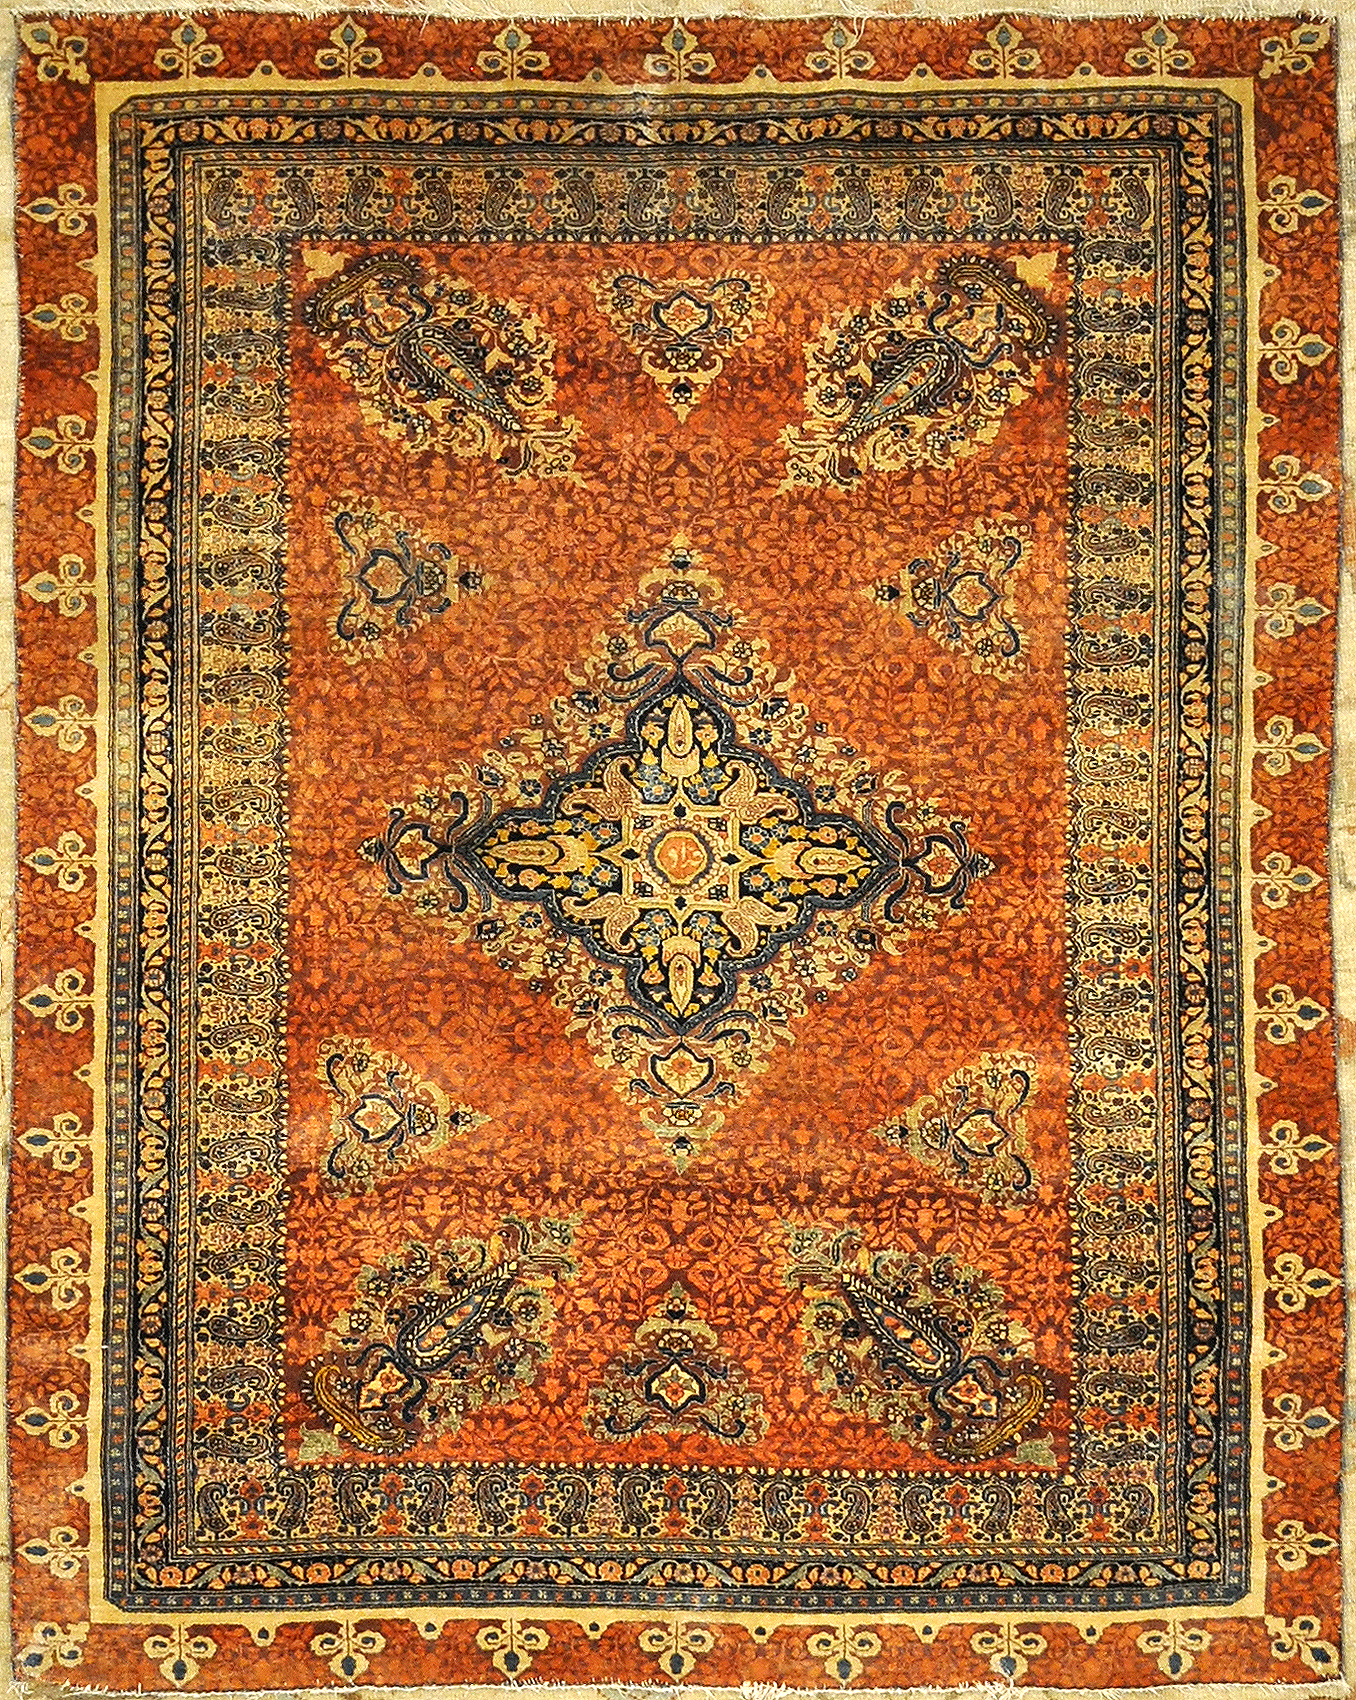 Finest Antique Silk Persian Heriz Tabriz. A piece of genuine authentic woven carpet art sold by Santa Barbara Design Center and Rugs and More.